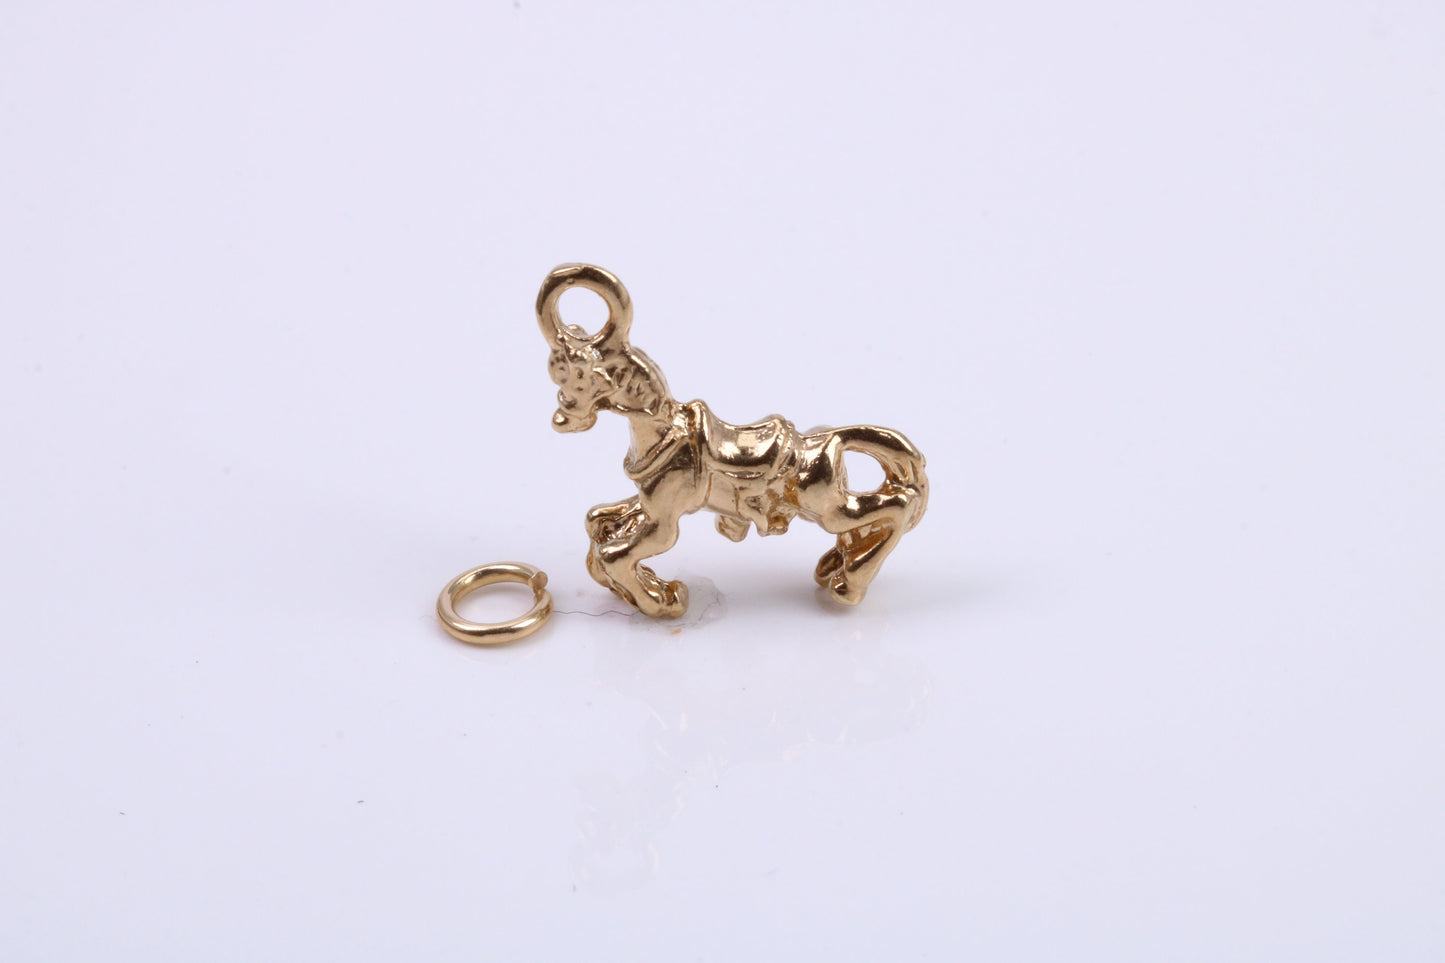 Stallion Charm, Traditional Charm, Made from Solid 9ct Yellow Gold, British Hallmarked, Complete with Attachment Link